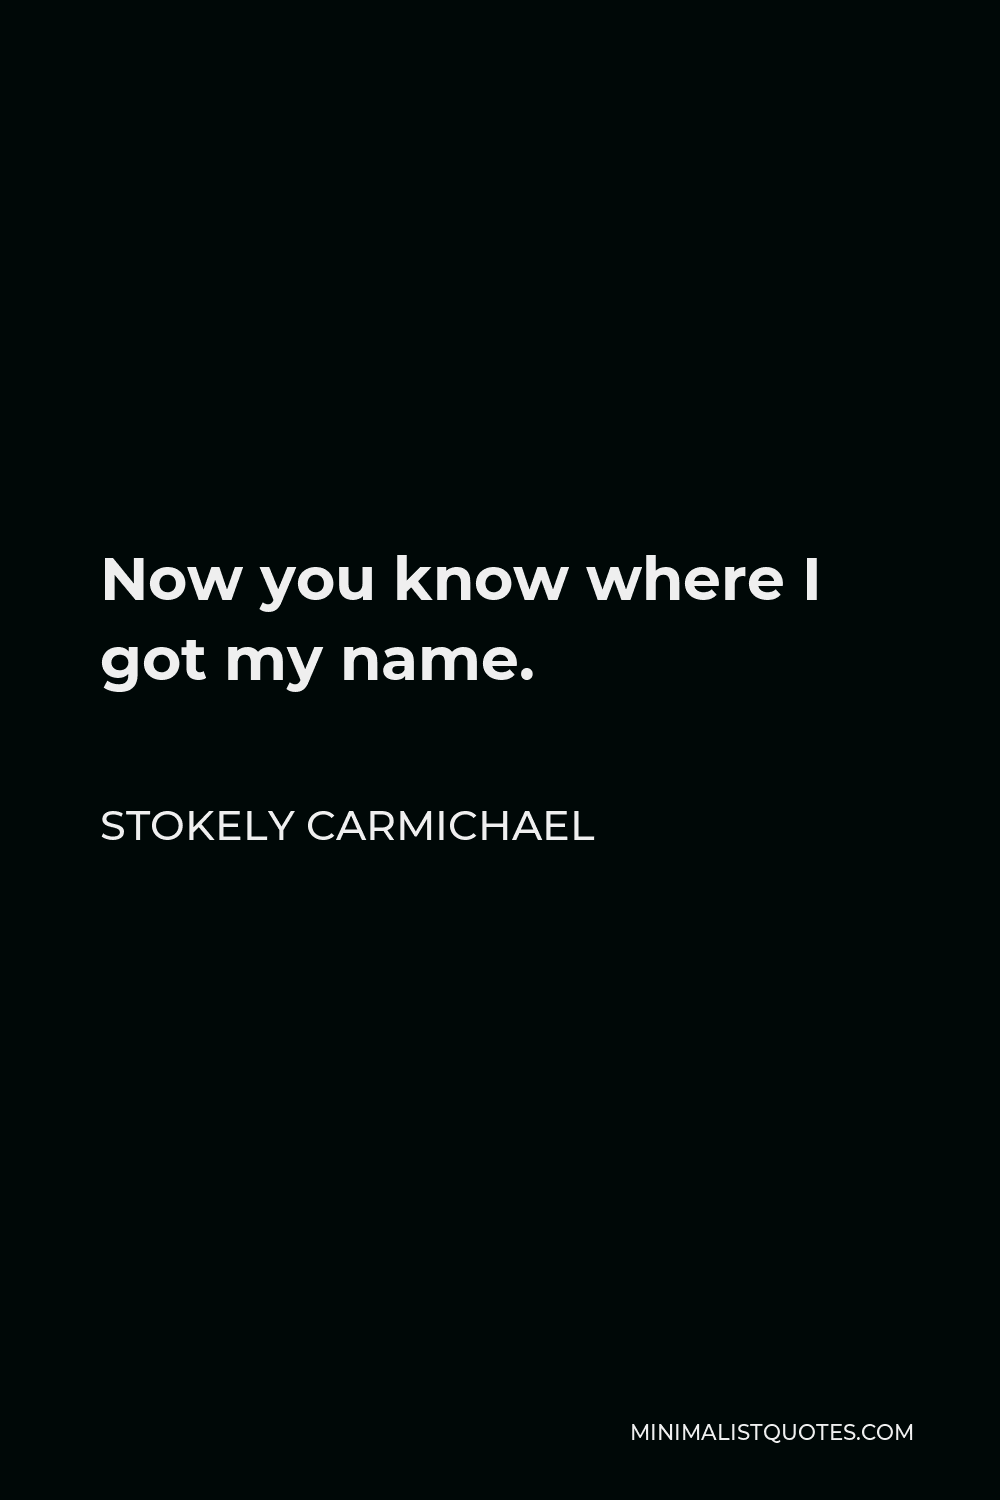 Stokely Carmichael Quote - Now you know where I got my name.